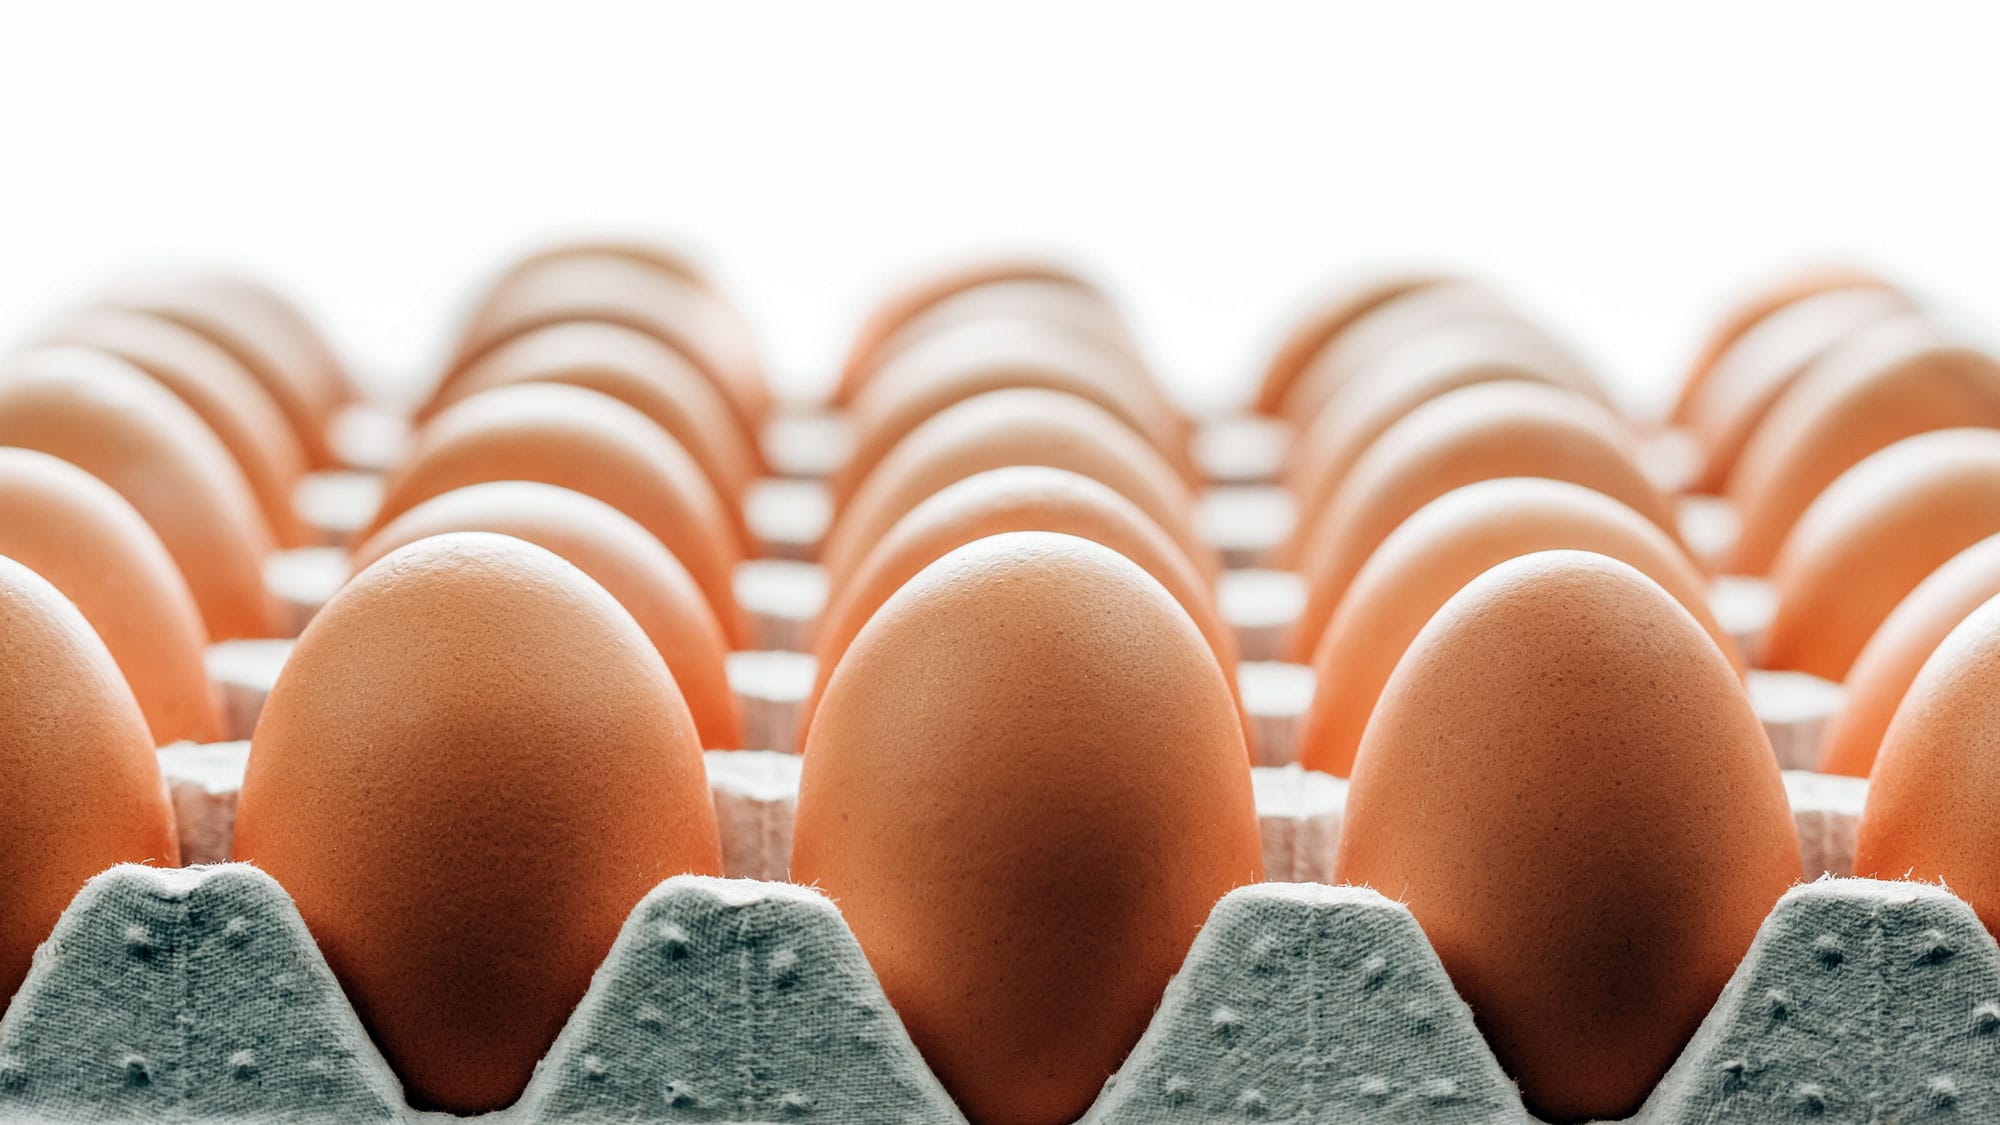 Macro close-up image of cage-free brown eggs against a white background, highlighting Eggs Unlimited commitment to providing high-quality, ethically-sourced wholesale eggs